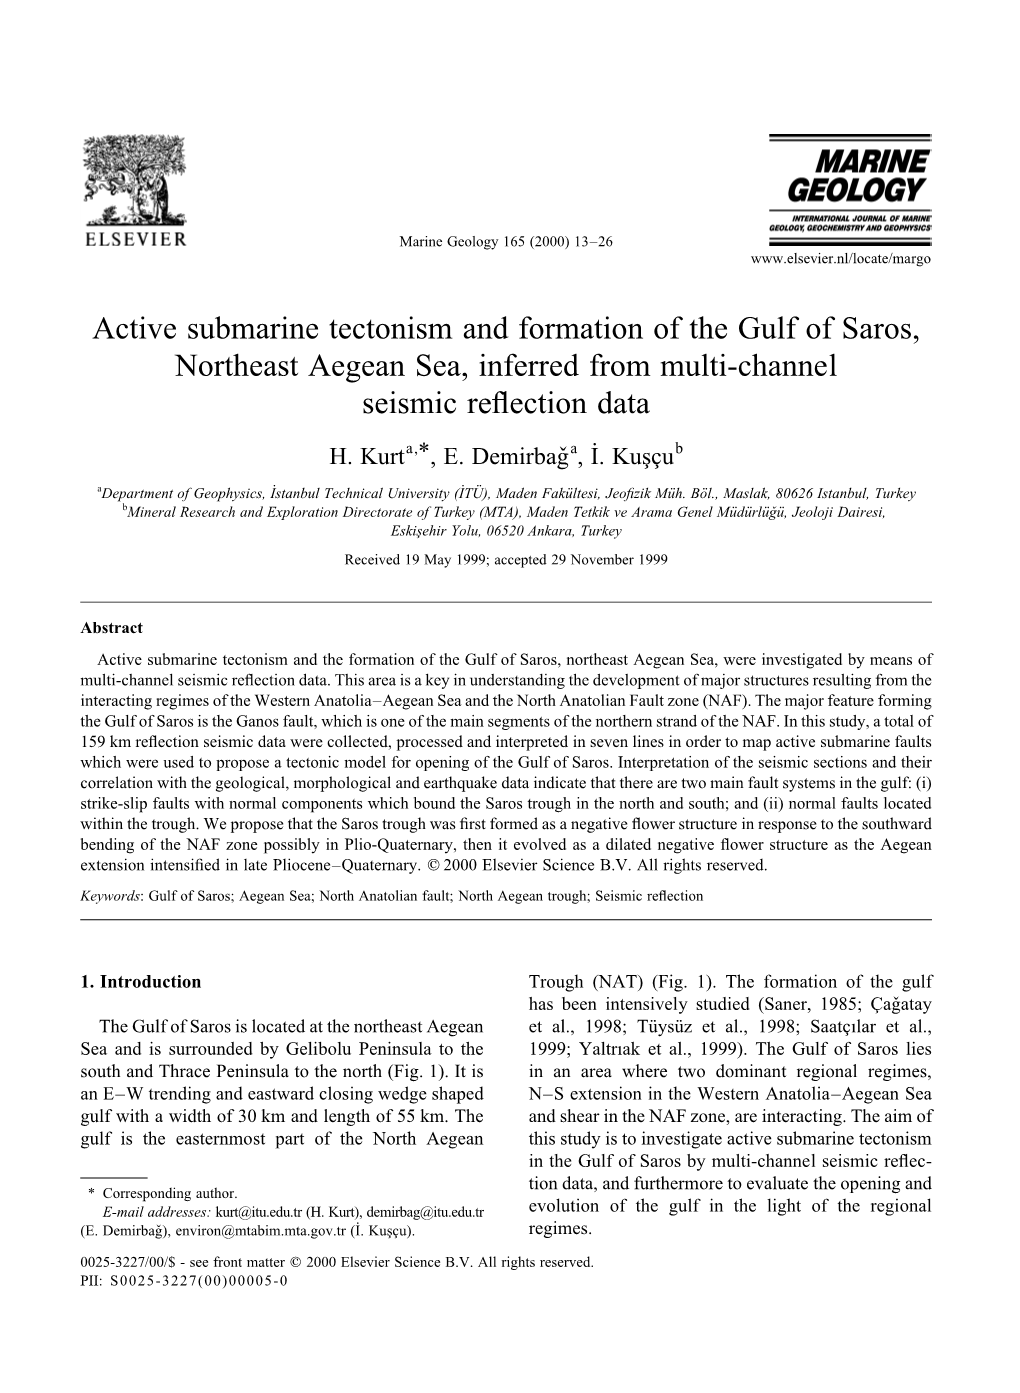 Active Submarine Tectonism and Formation of the Gulf of Saros, Northeast Aegean Sea, Inferred from Multi-Channel Seismic Reﬂection Data